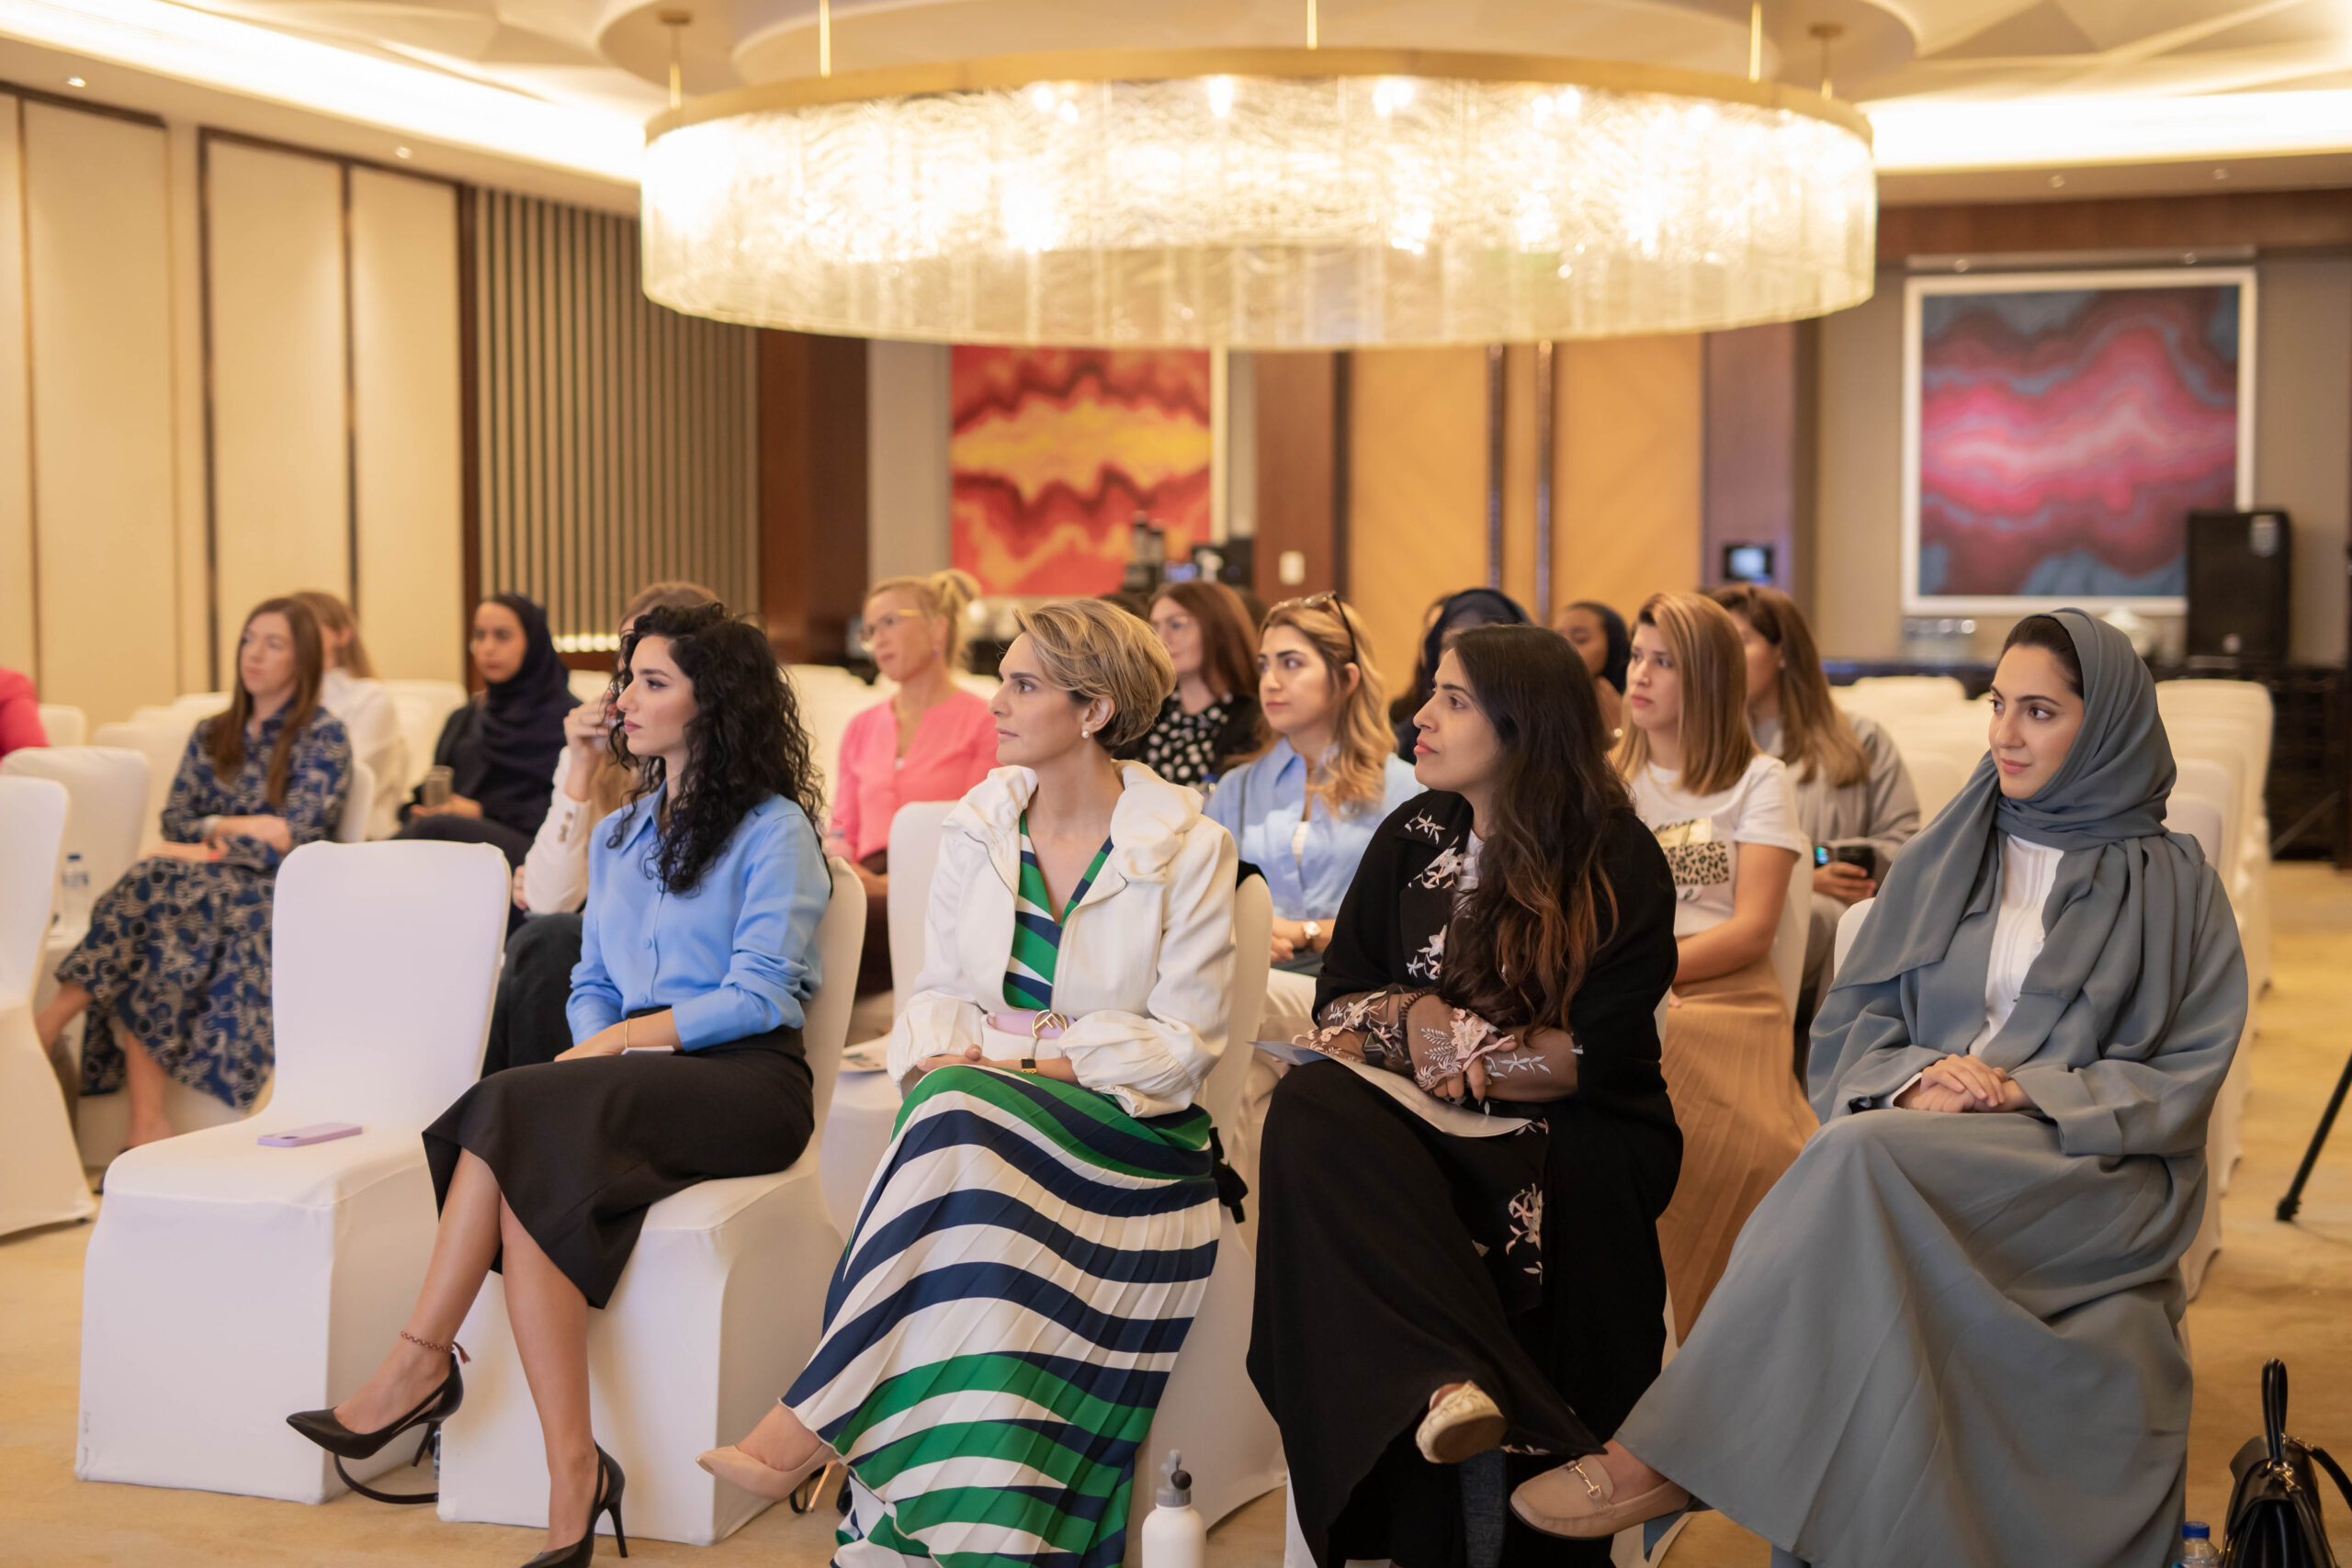 FEMALE NETWORK PLATFORM, WILD (WOMEN IN LEADERSHIP DELIVER) HELD ITS FIRST EVENT IN SAUDI ARABIA